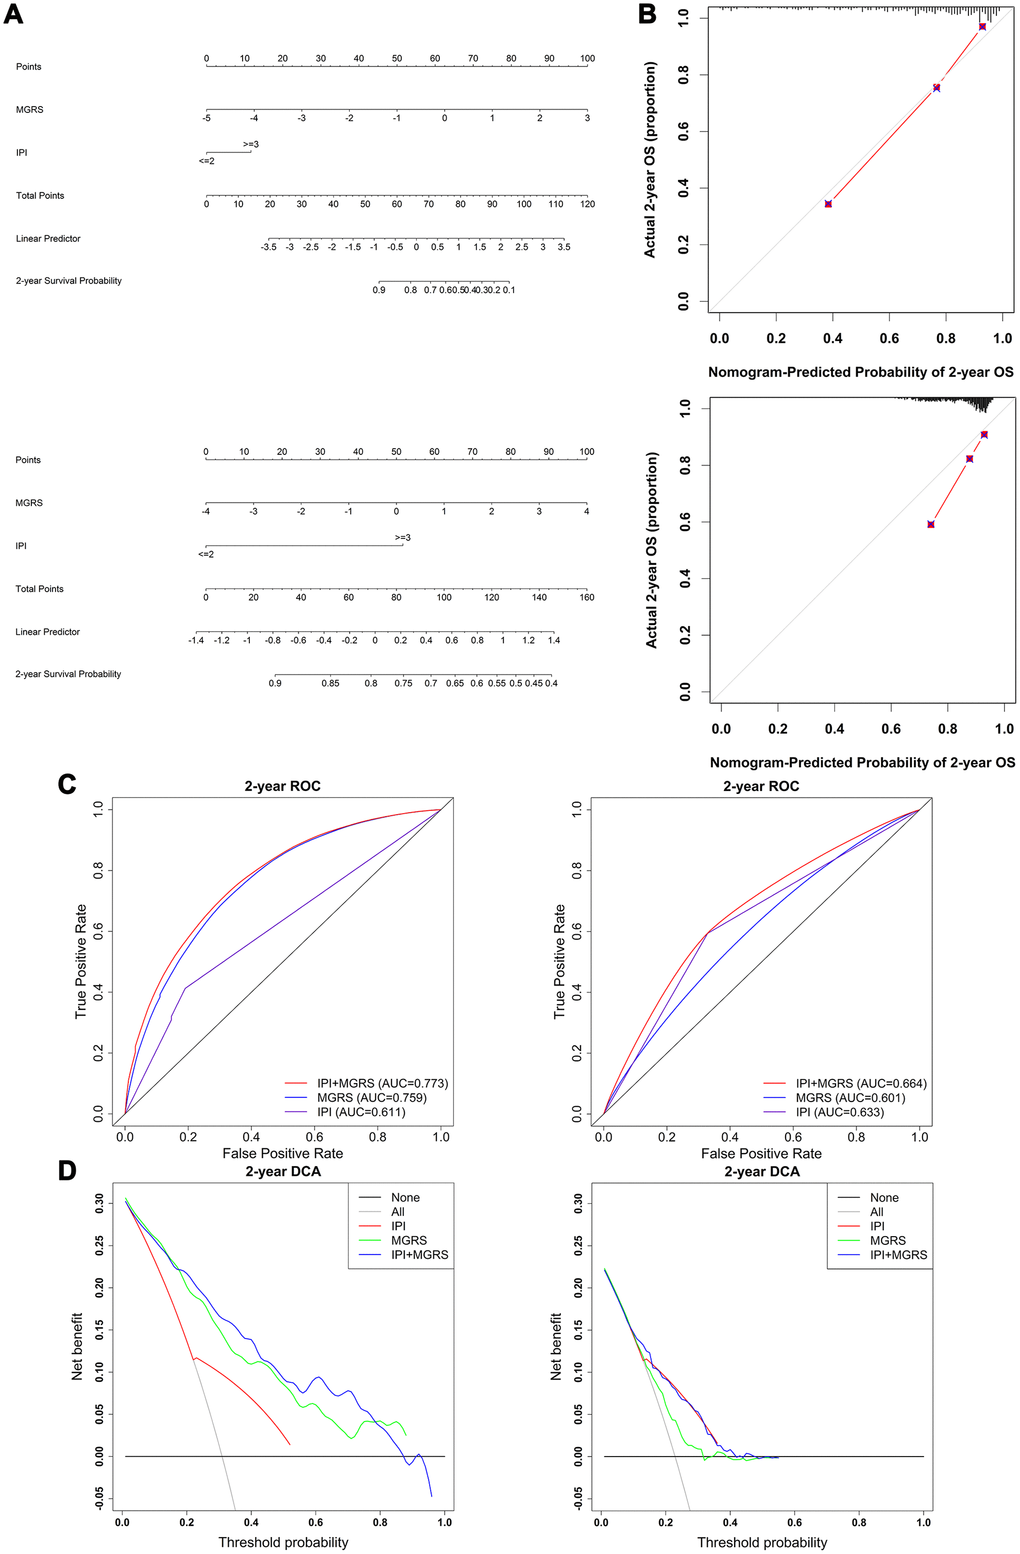 Evaluation and comparison of model performances in predicting 2-year survival. (A) Nomogram based on the International Prognostic Index (IPI) and multigene risk score (MGRS) with the training dataset (top panel) and validation dataset (bottom panel); (B) Calibration plot of the nomogram for estimation of survival rates at 2 years after diagnosis in the training dataset (top panel) and validation dataset (bottom panel); (C) Time-dependent ROC curves at 2 years after diagnosis for the IPI, MGRS, and IPI+MGRS models in the training dataset (left panel) and validation dataset (right panel); (D) Decision curves at 2 years after diagnosis for the IPI, MGRS, and IPI+MGRS models, in the training dataset (left panel) and validation dataset (right panel).